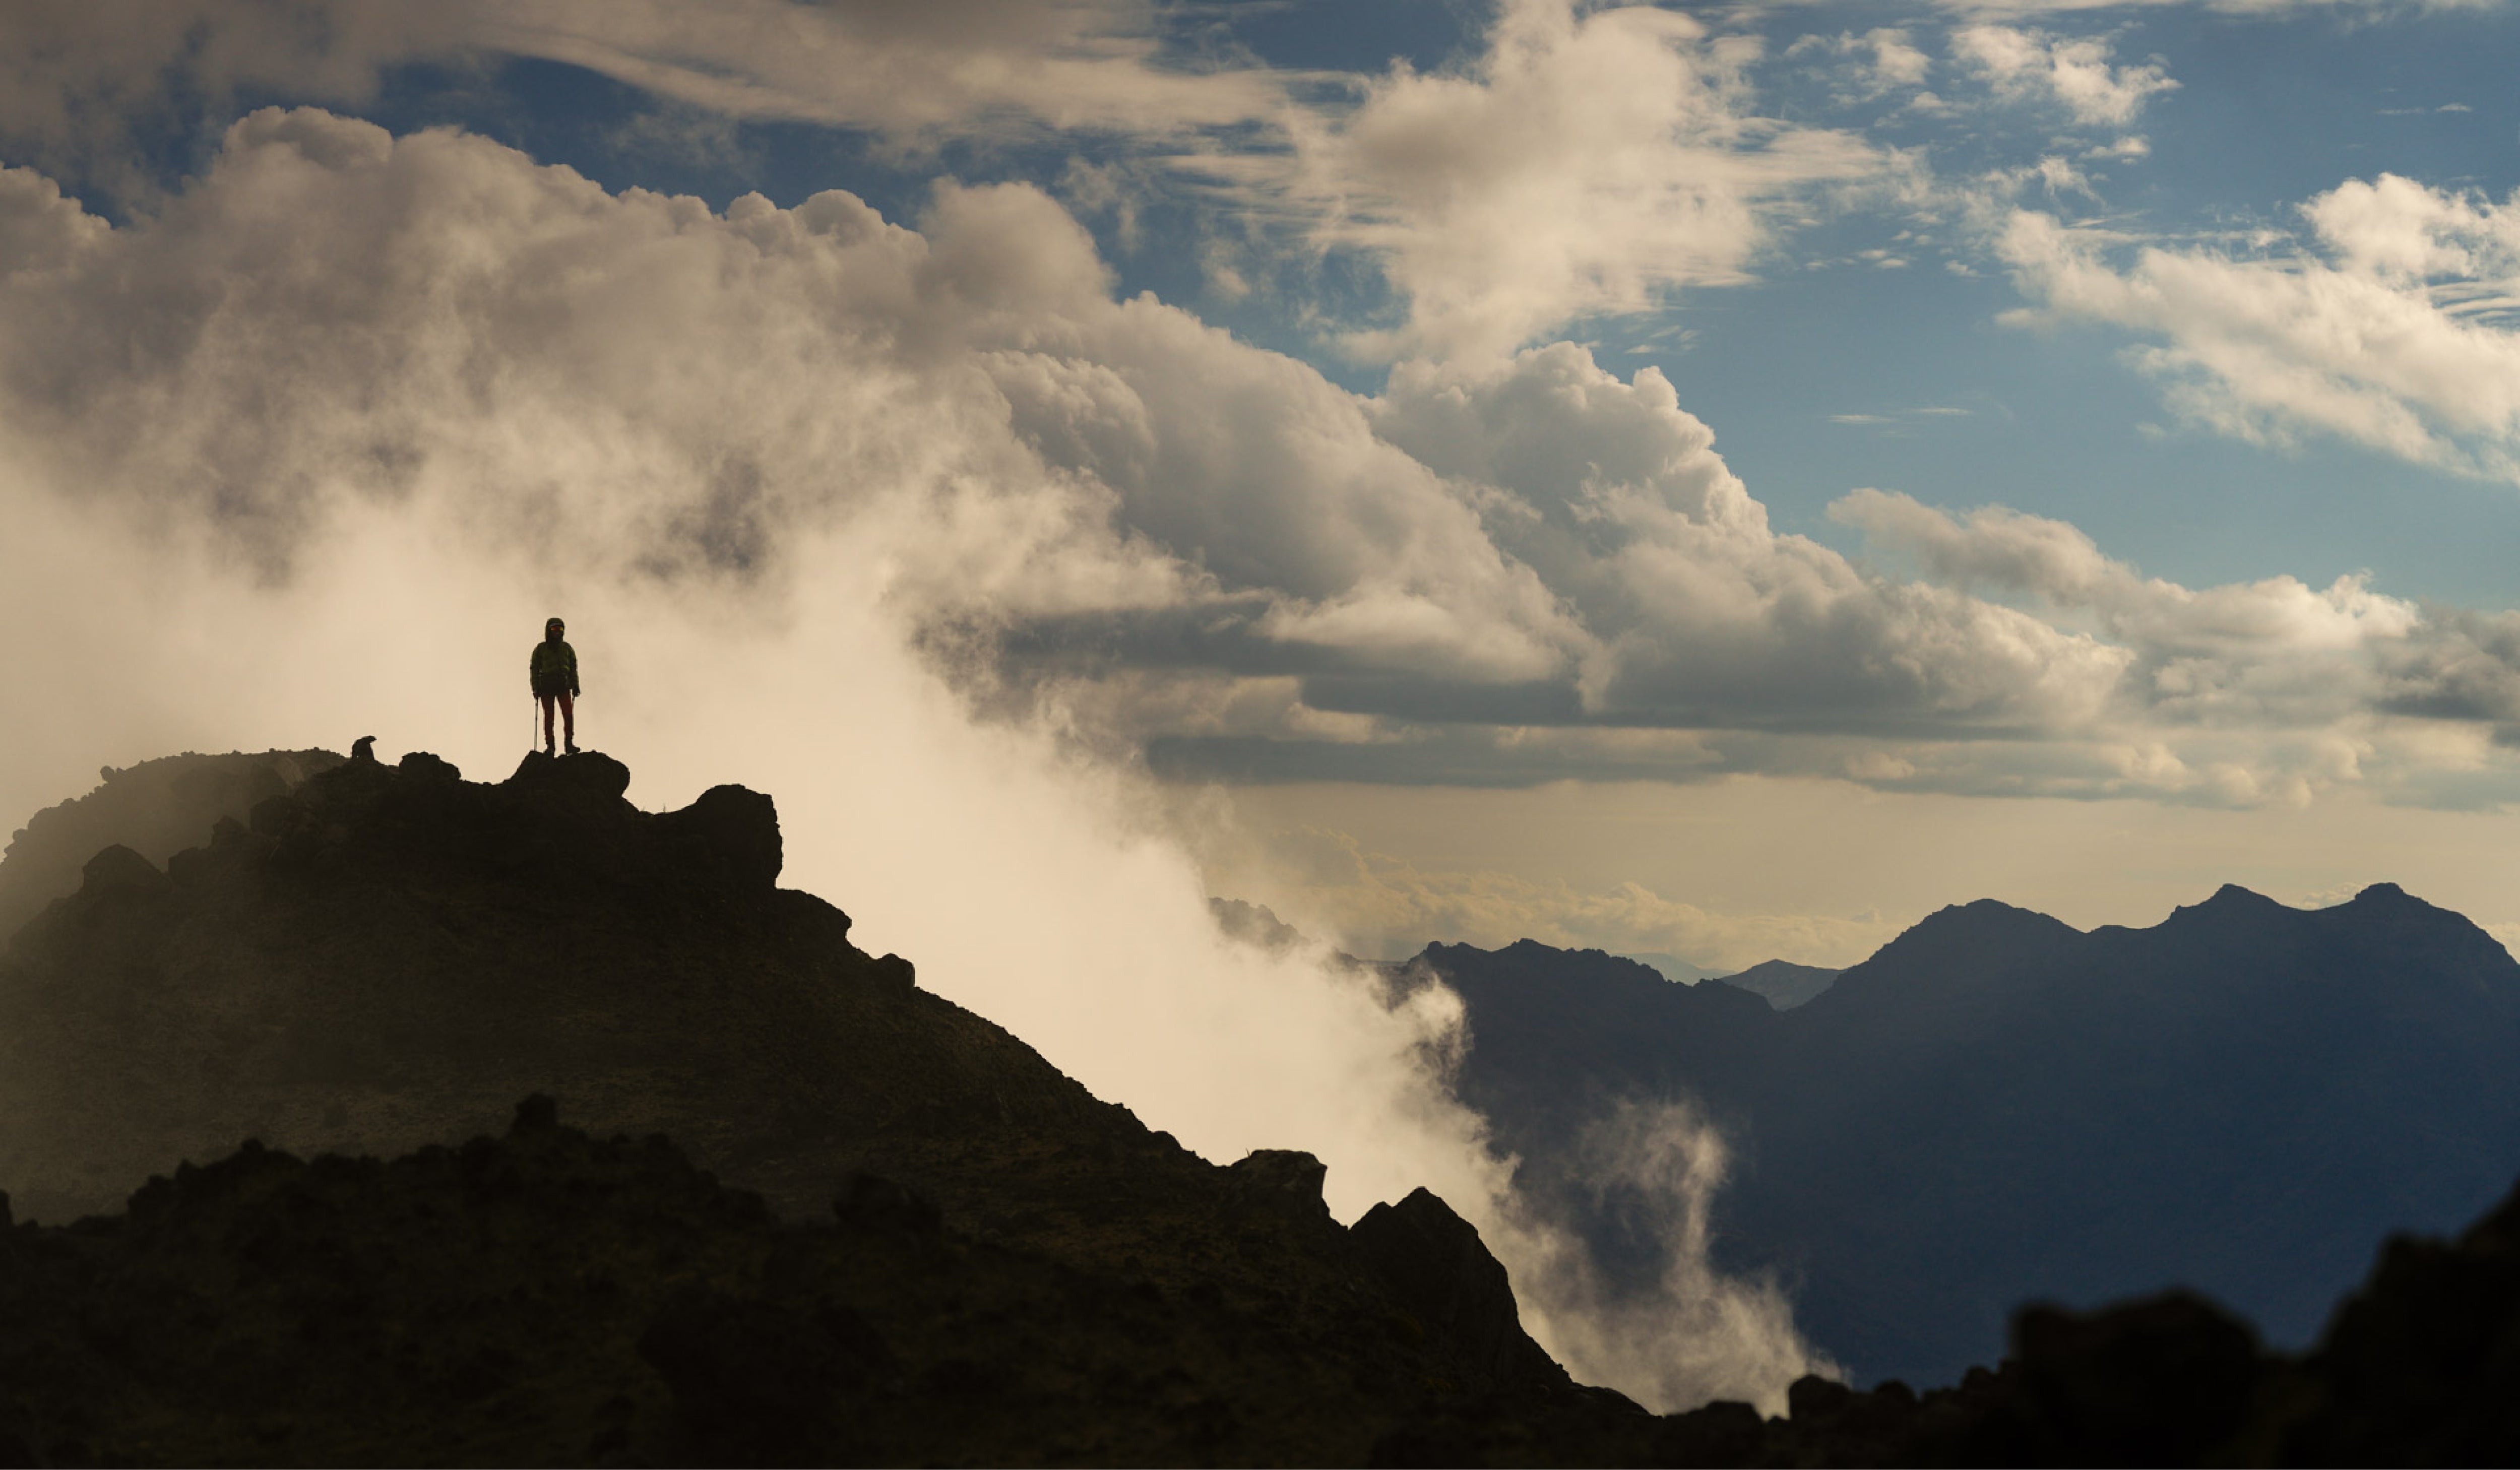 Photo courtesy of Andrés Molestina, depicting person standing at the summit of a landscape during sunset.